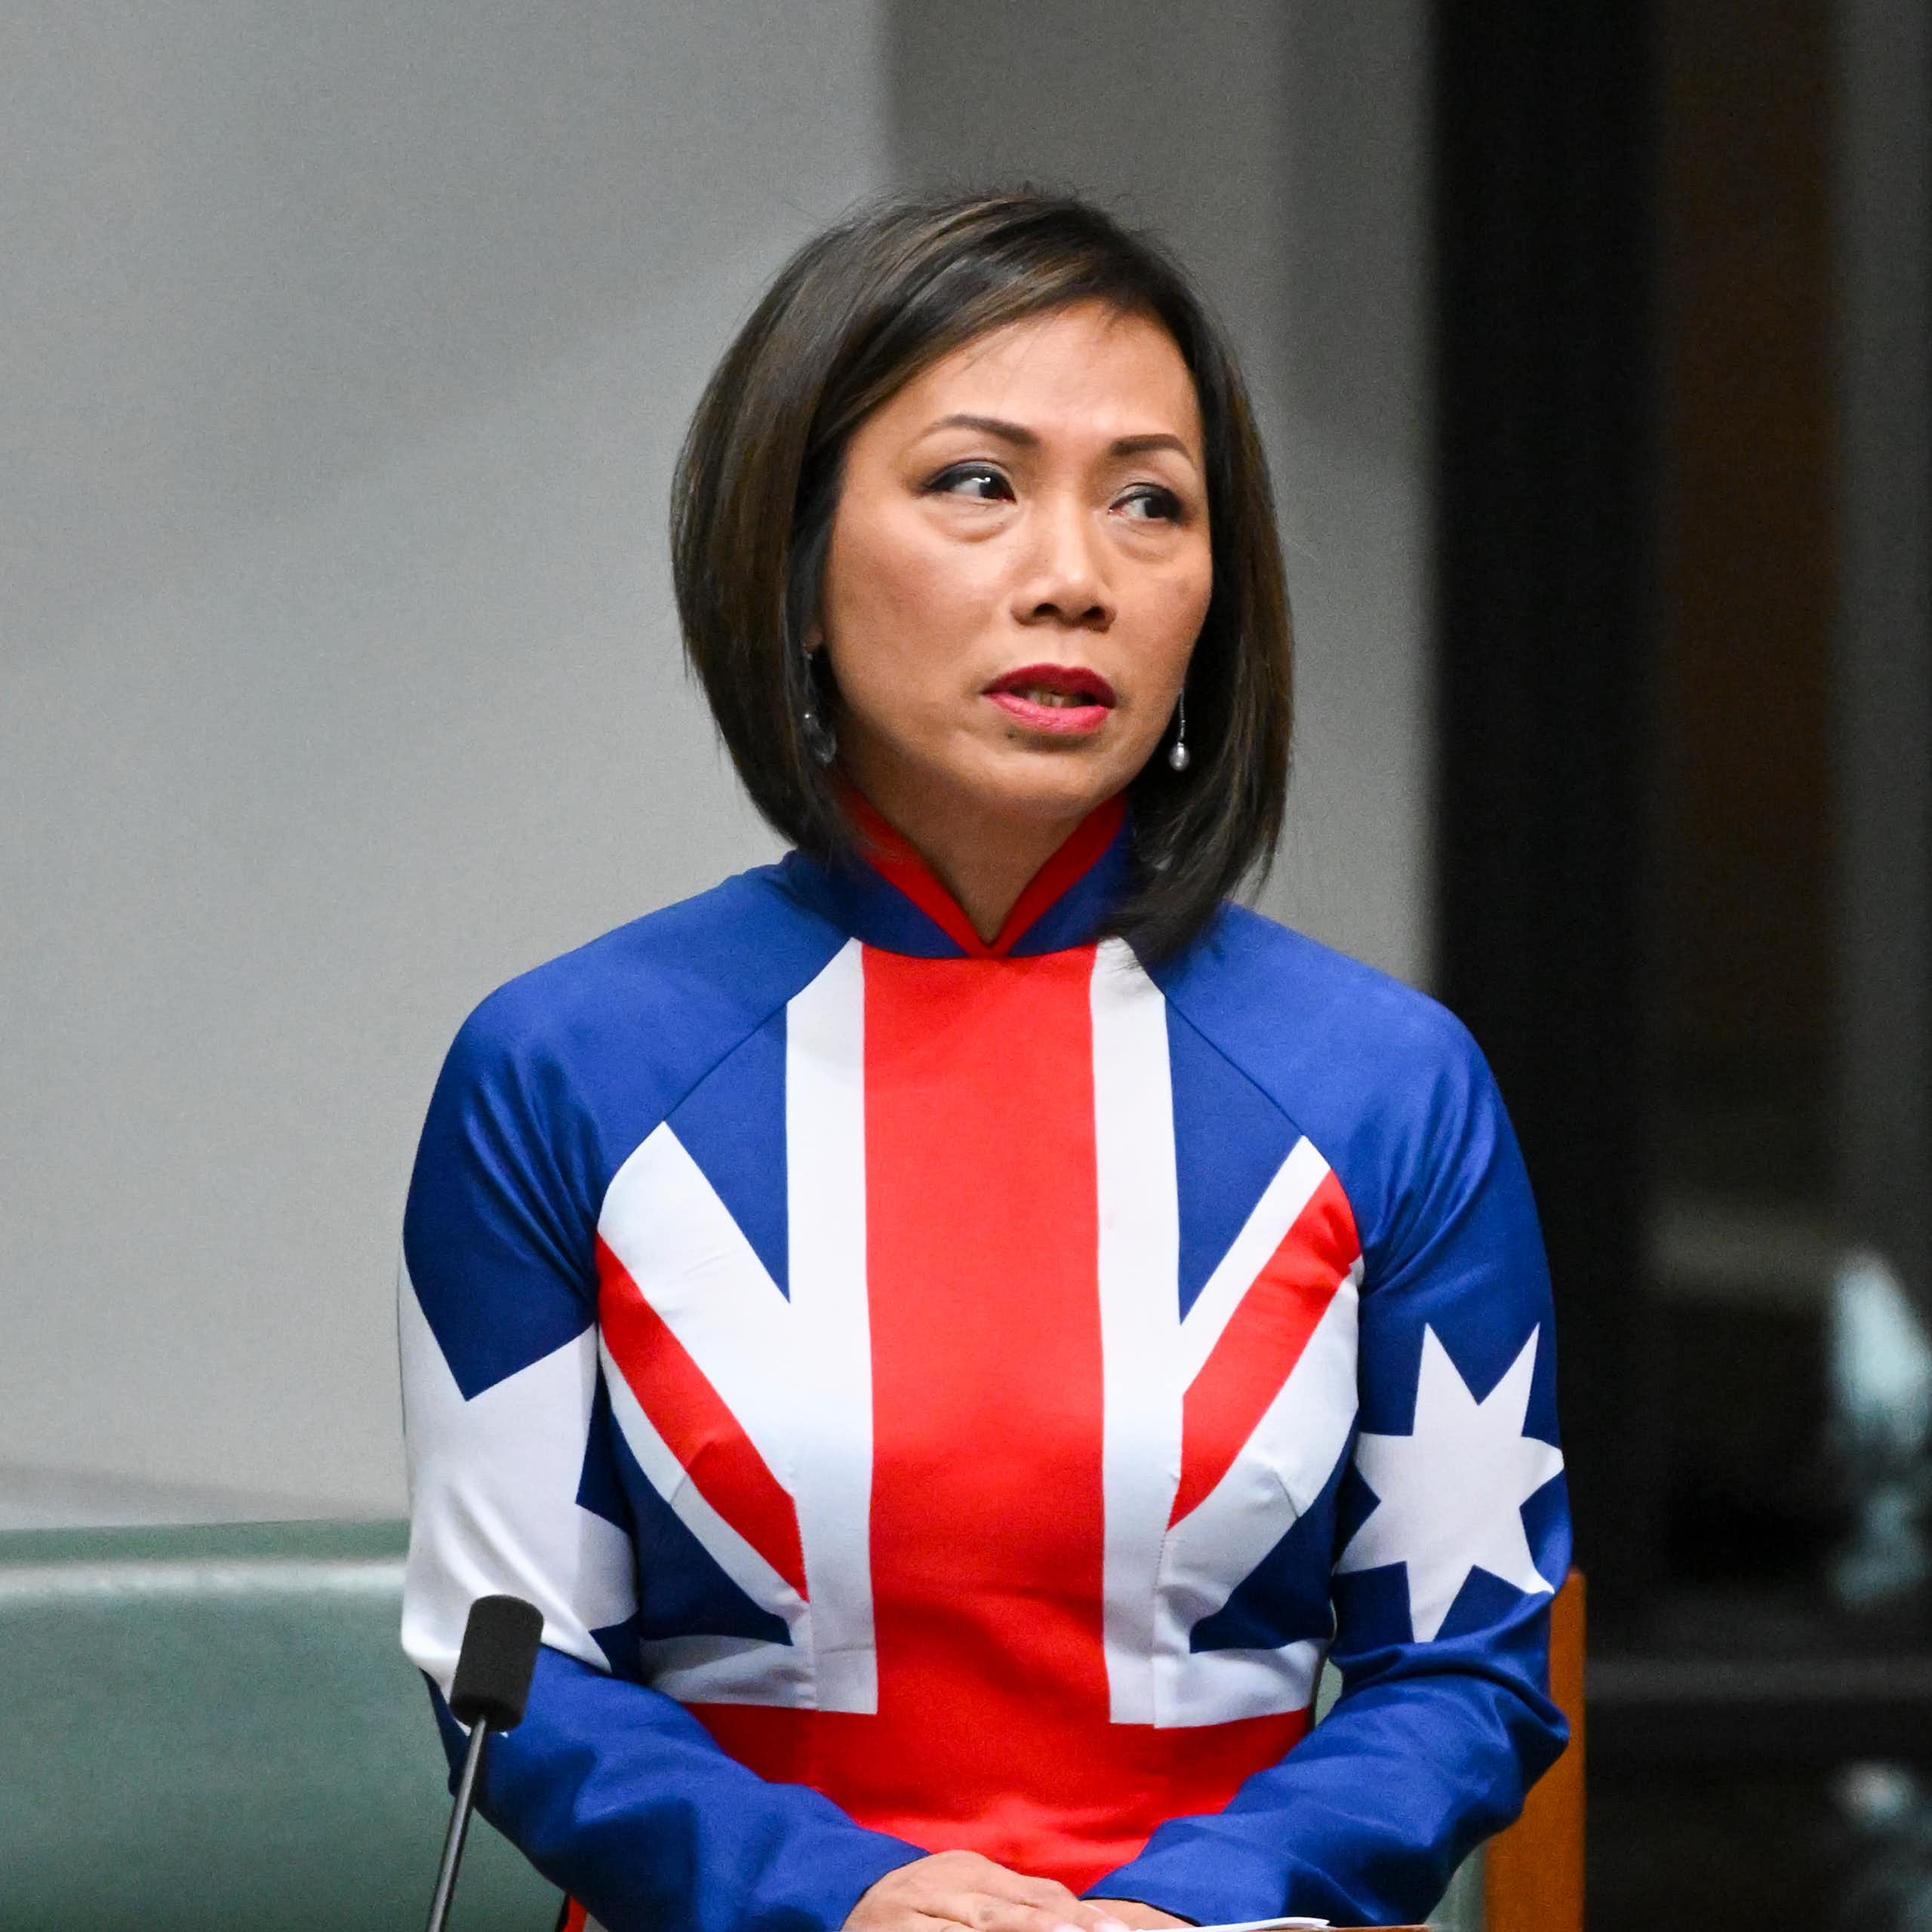 Politics with Michelle Grattan: Independent MP Dai Le on the church attack in her electorate